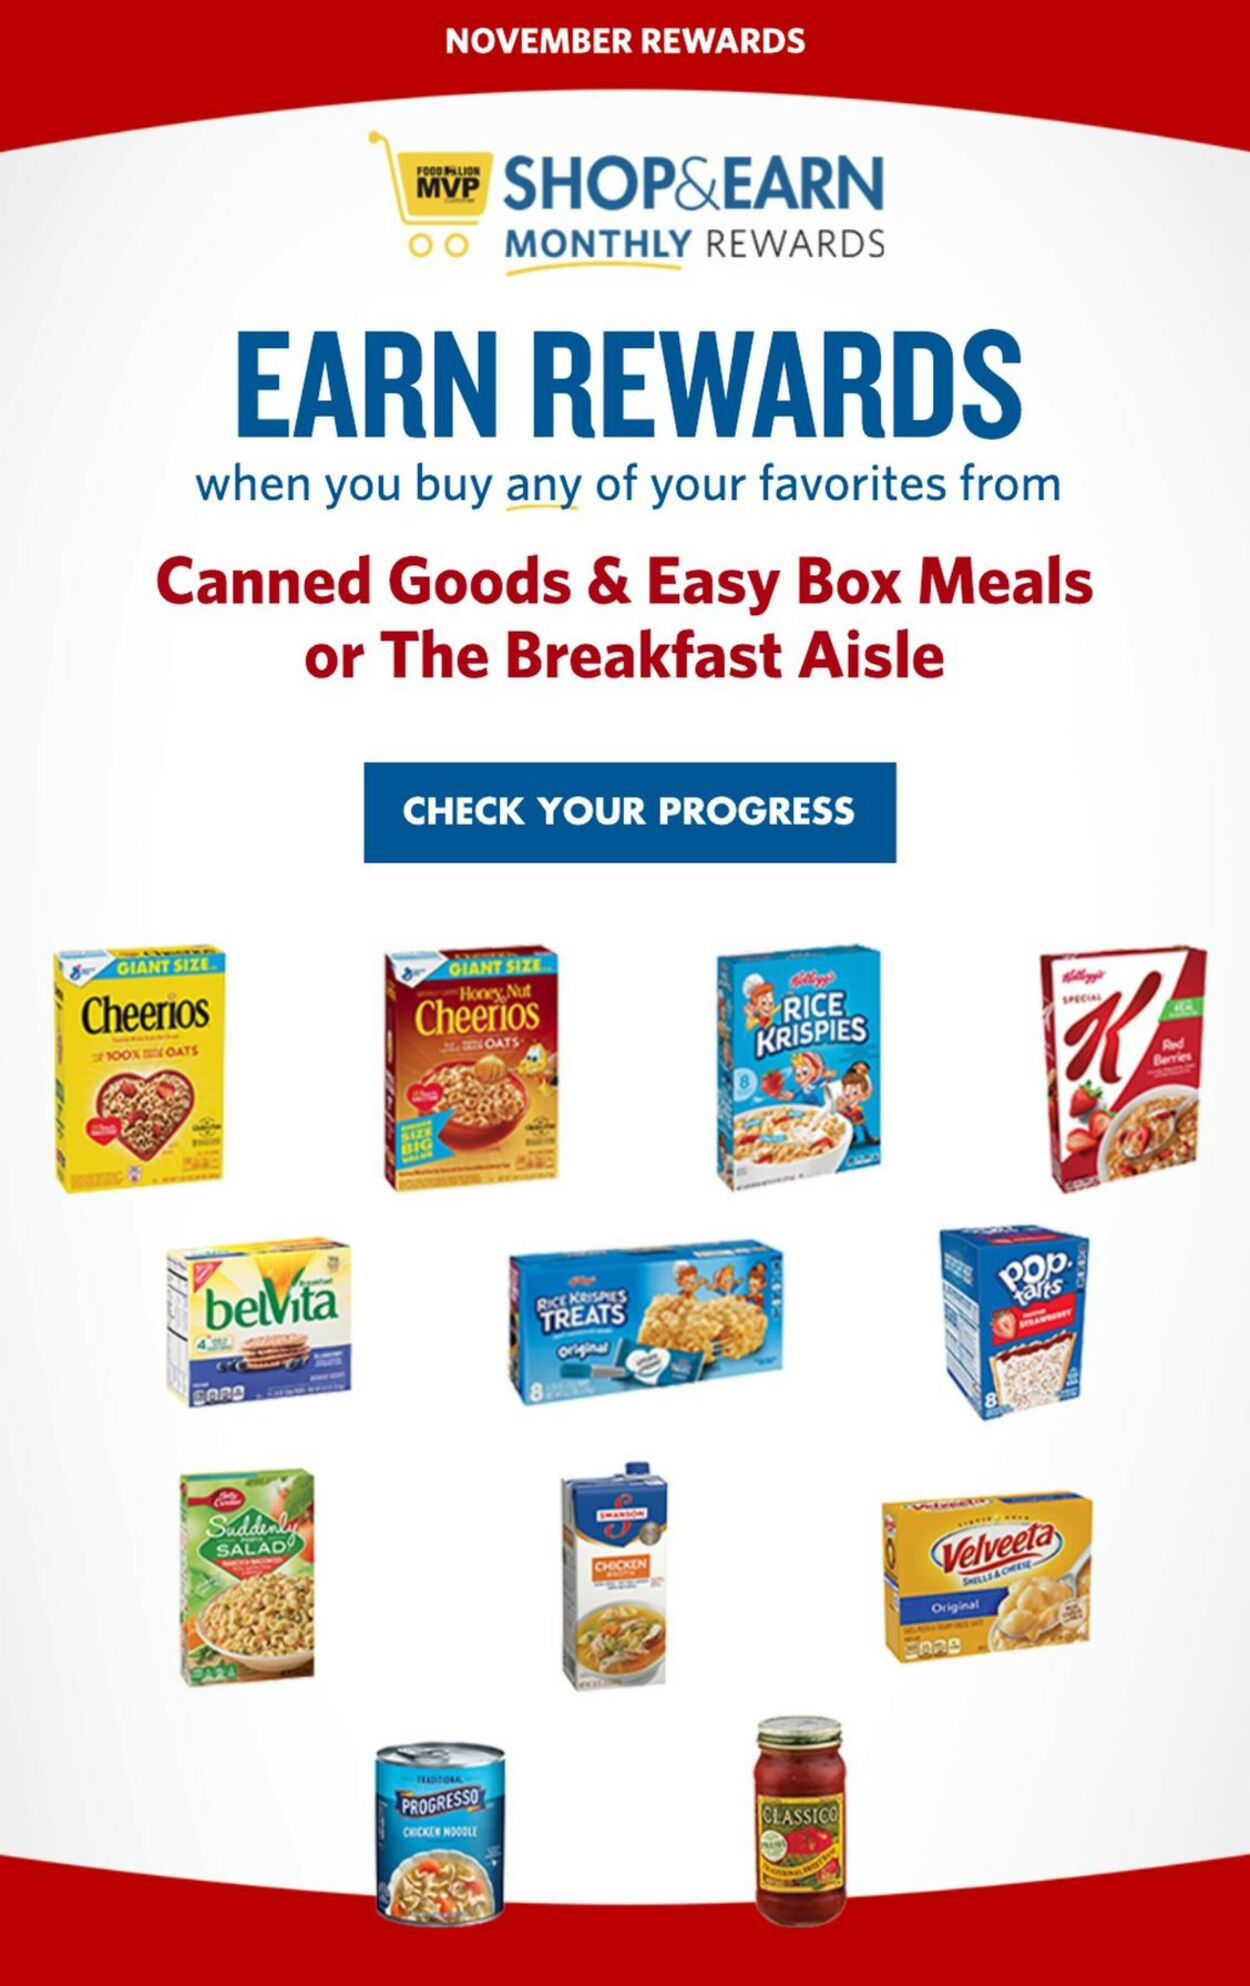 Food Lion Ad from 11/09/2022